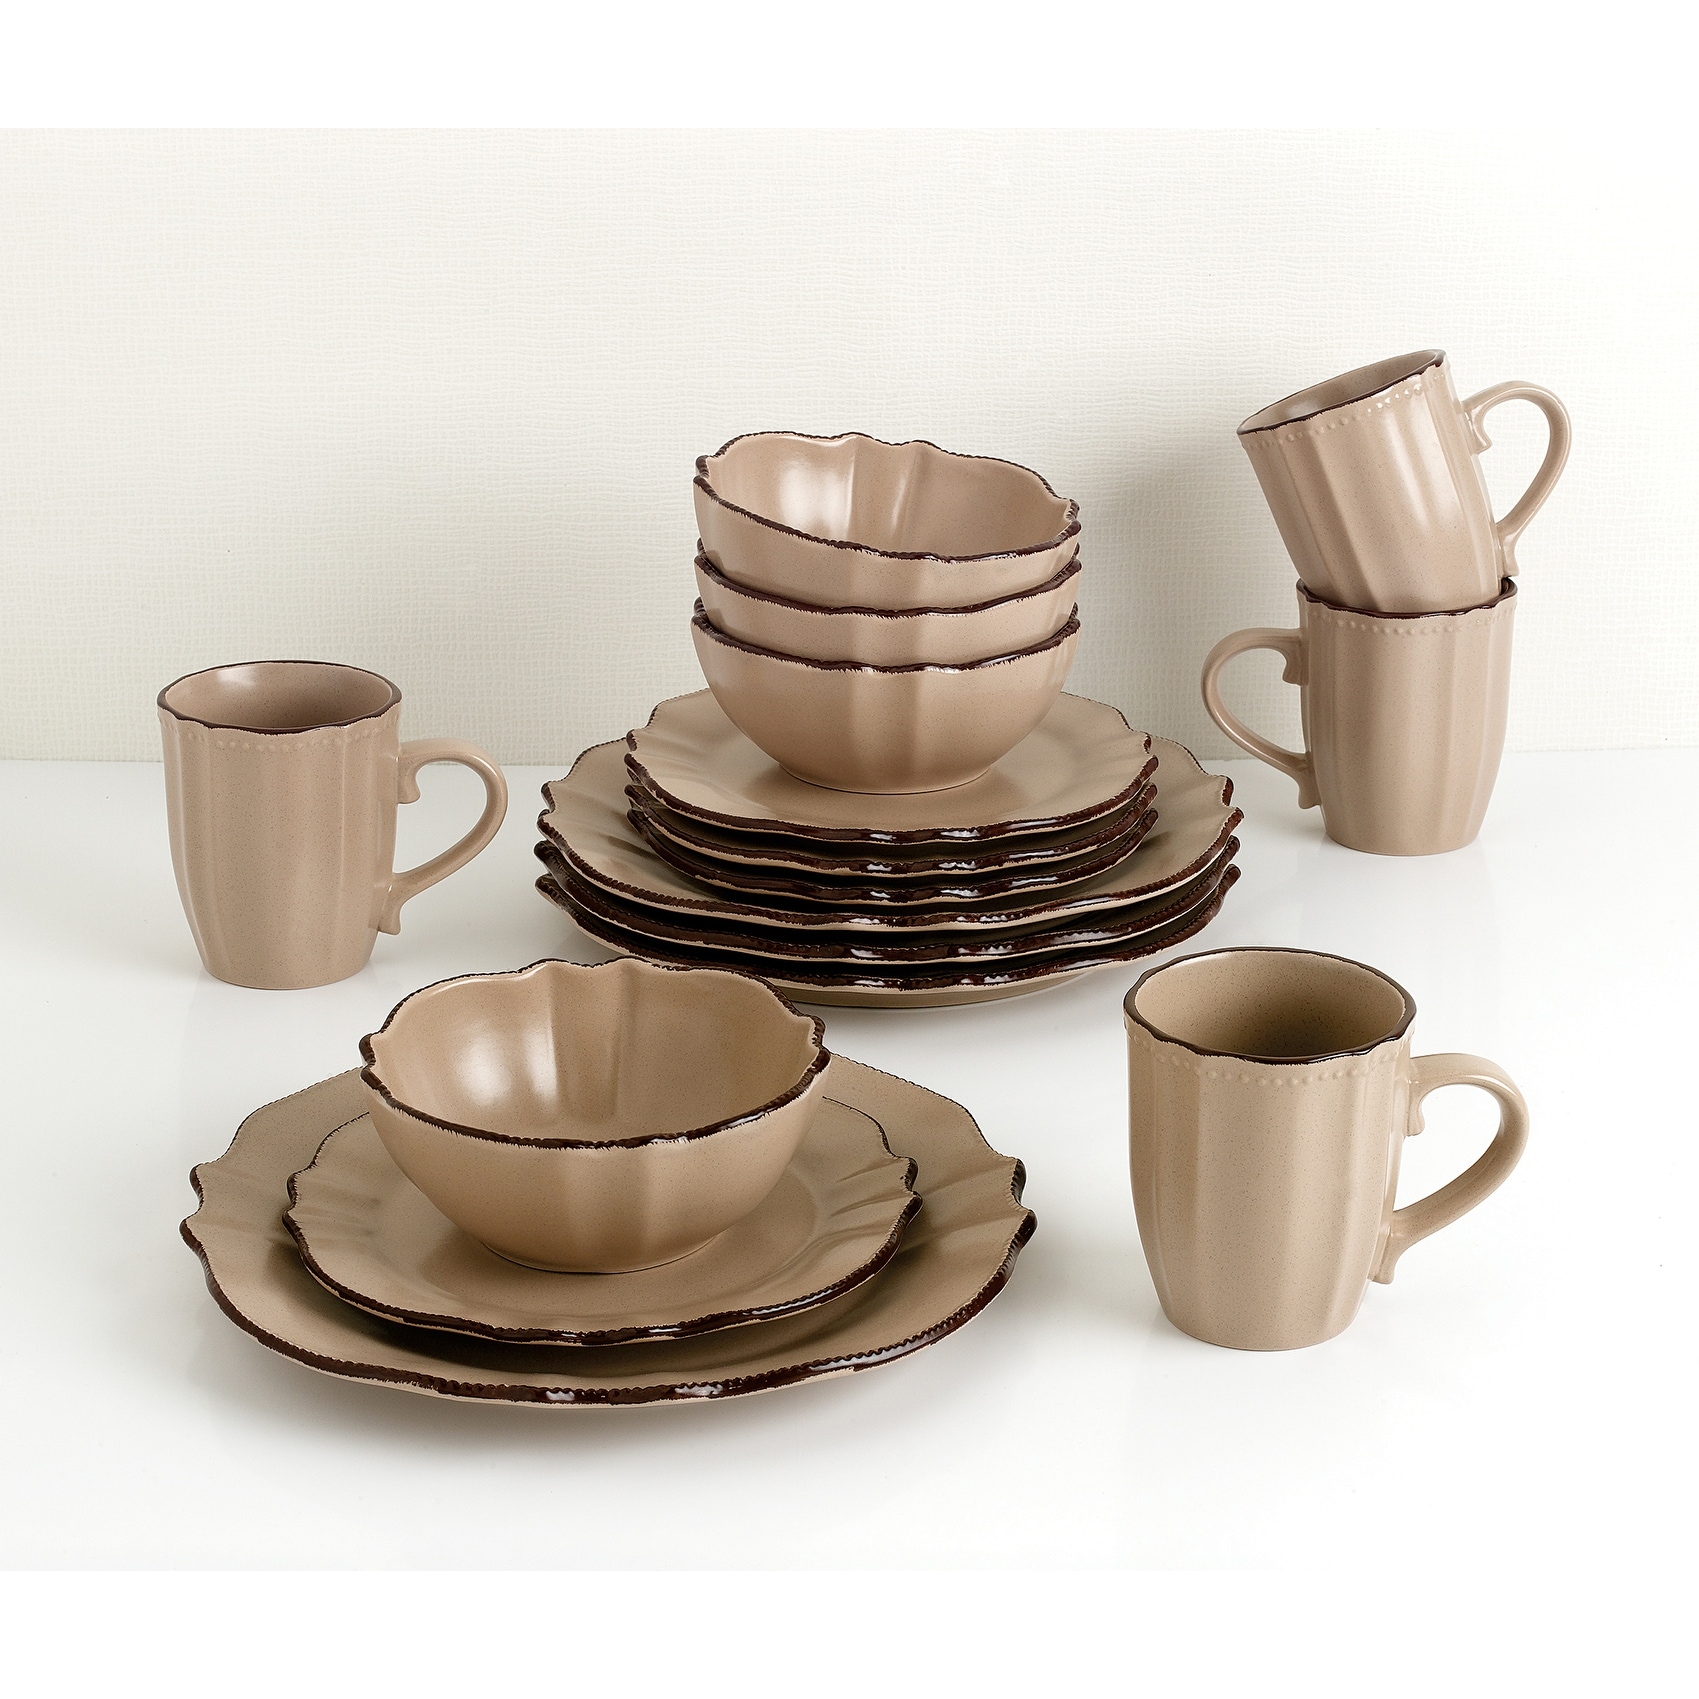 https://ak1.ostkcdn.com/images/products/is/images/direct/812bcaa743fe2227fccd6cb558e5ea564bf3b277/Lorren-Home-Trends-16-Piece-Scalloped-Edge-Cocoa-Dinnerware.jpg